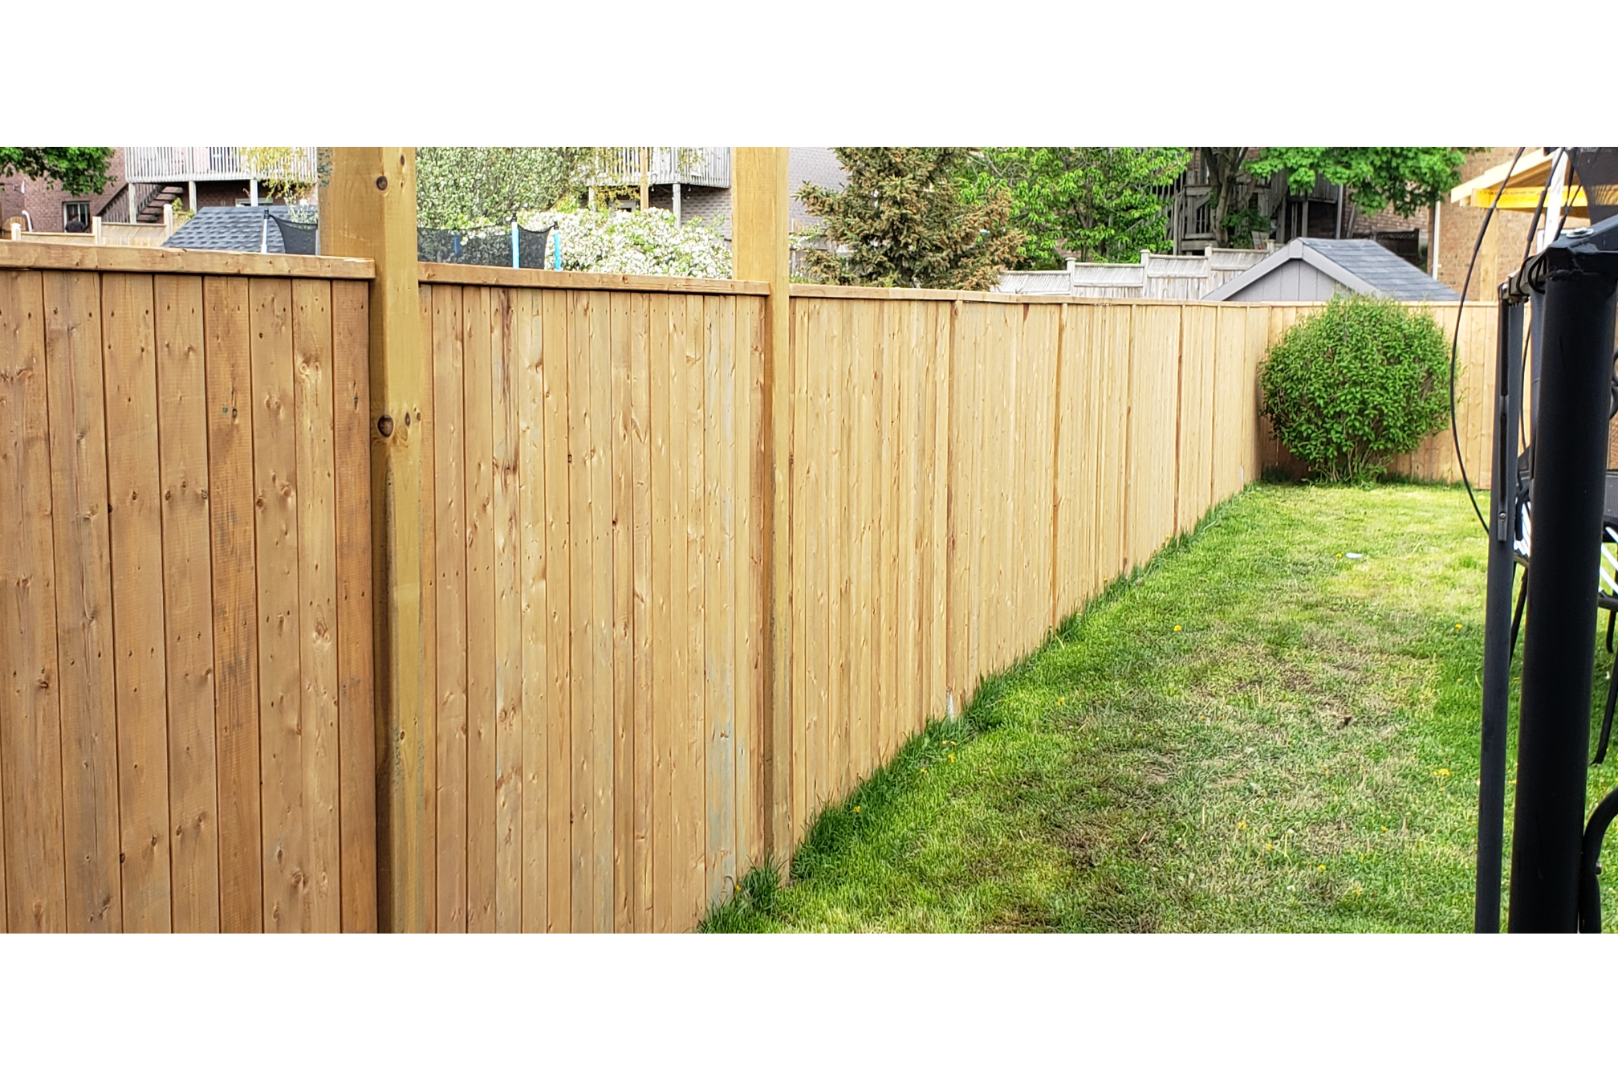 An image of a wood privacy fence separating yards in Kent, OH